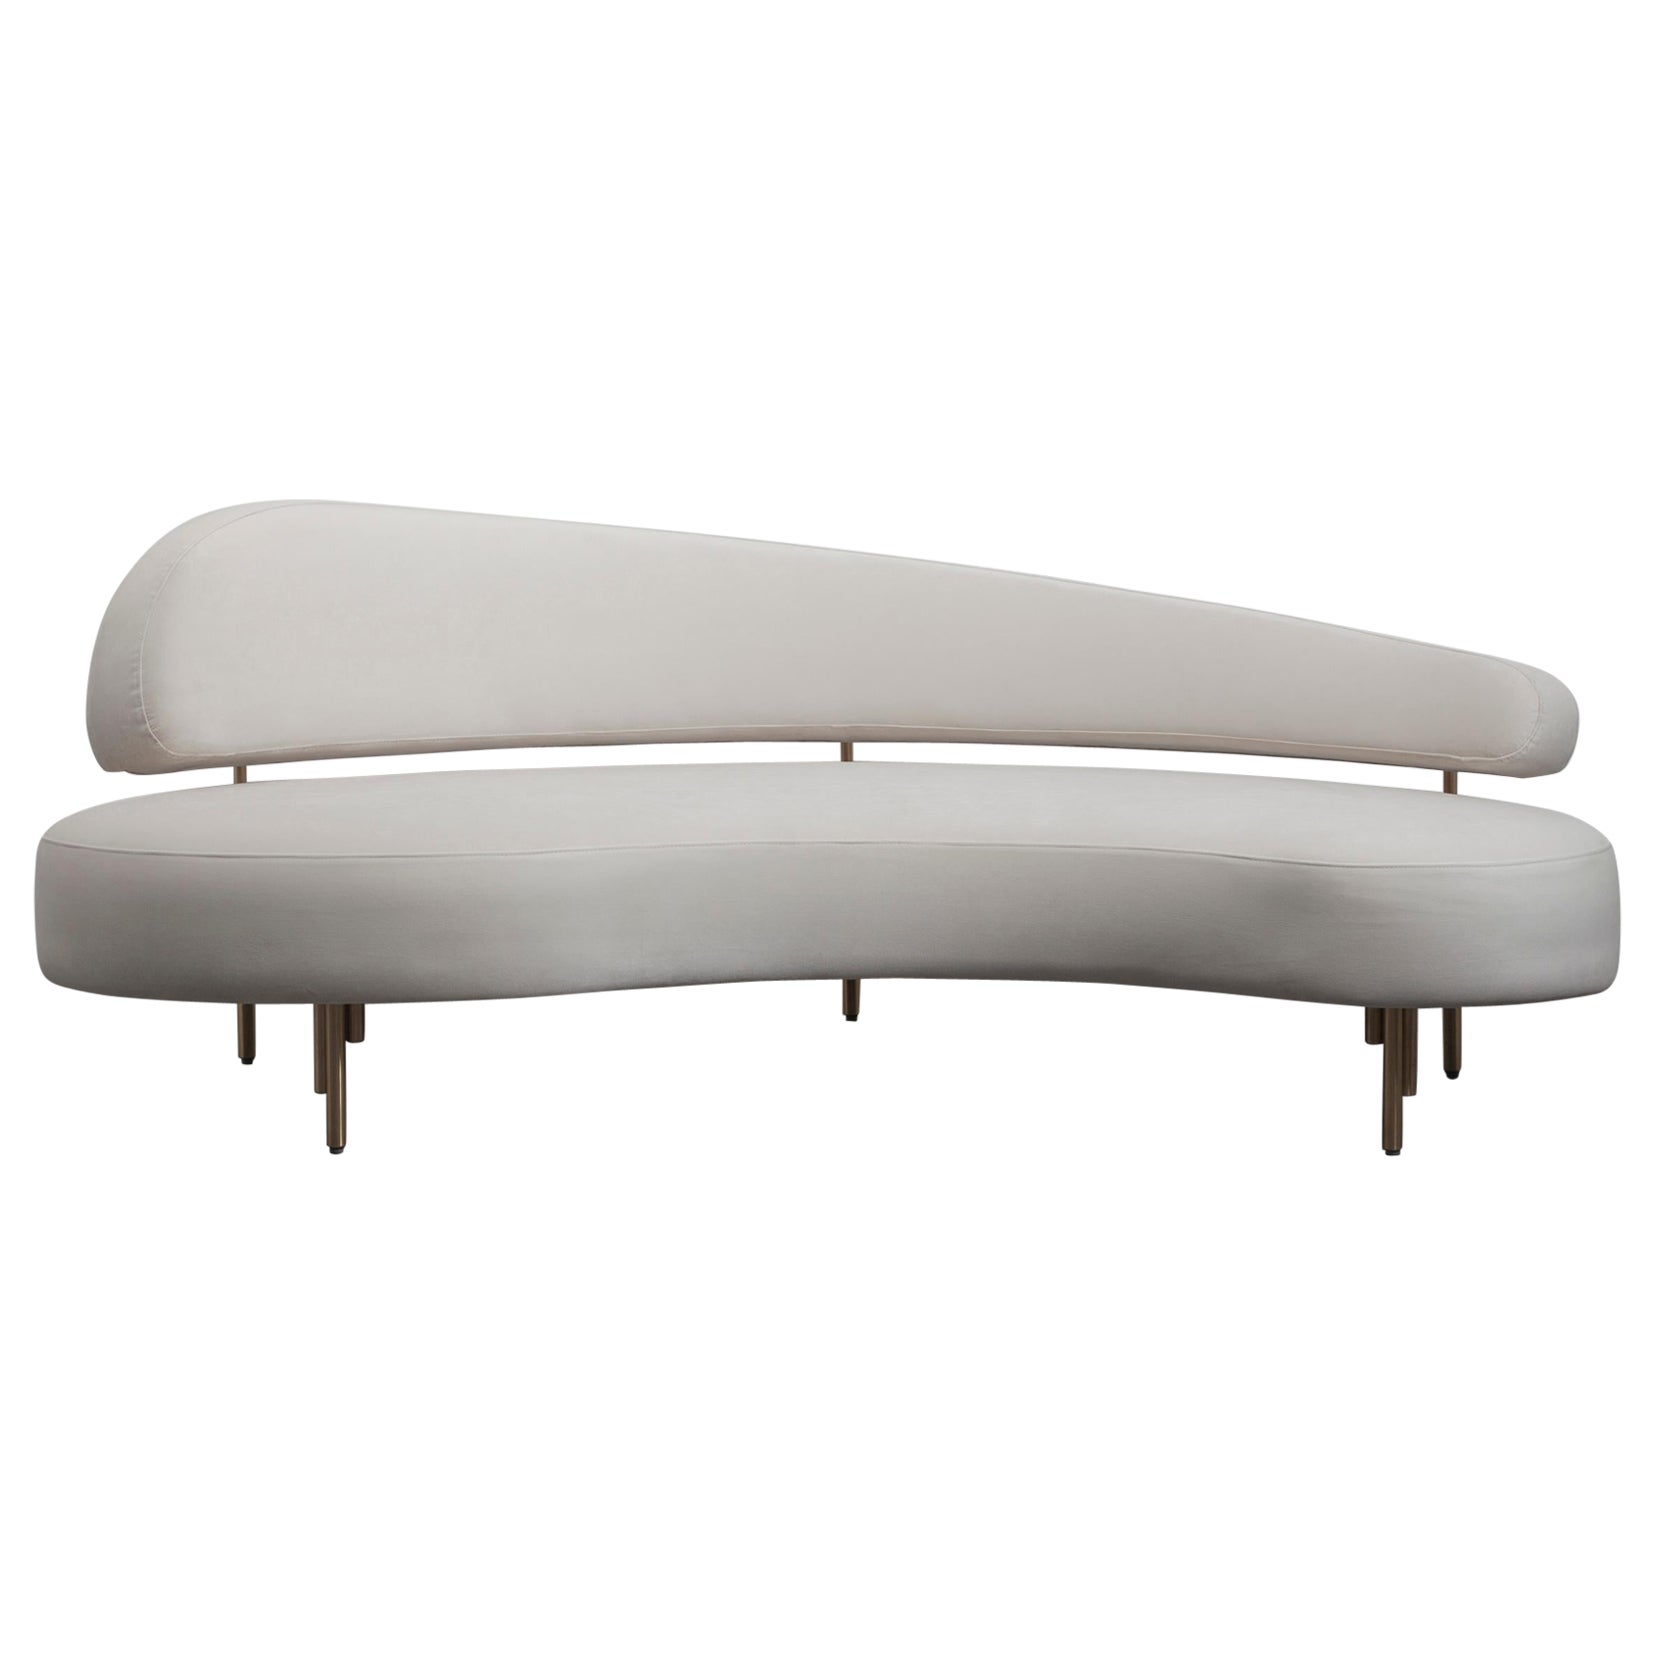 SITIERA_01 Velvet Upholstered 3-seater Sofa in Ivory with Bronze Legs by ANDEAN For Sale